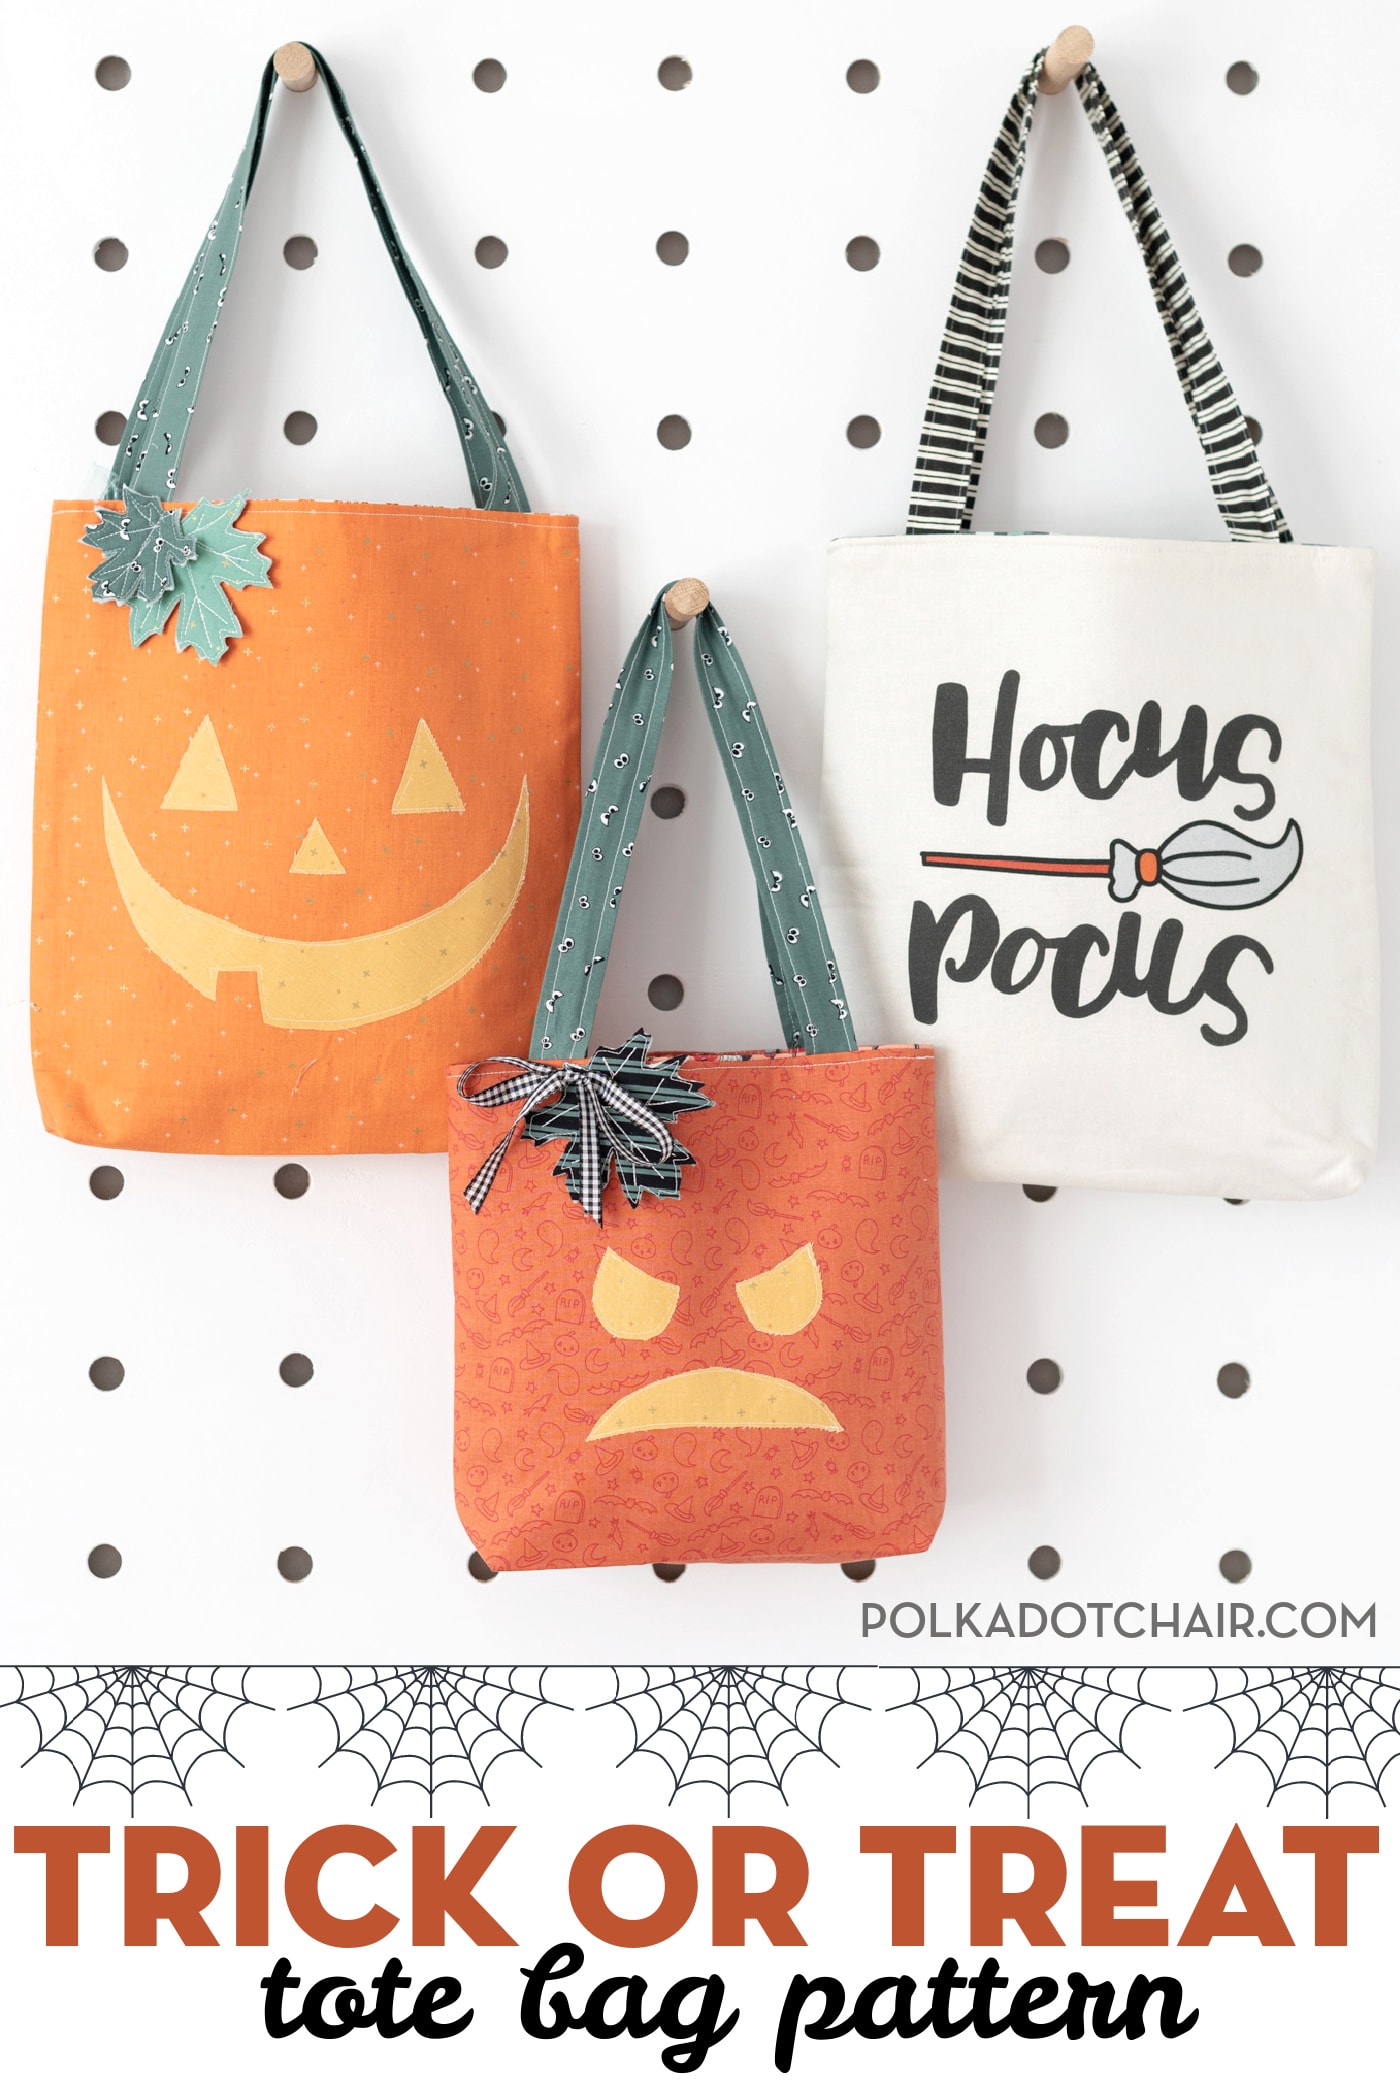 How to Make the Sweet Treat Bag - Free Pattern Download